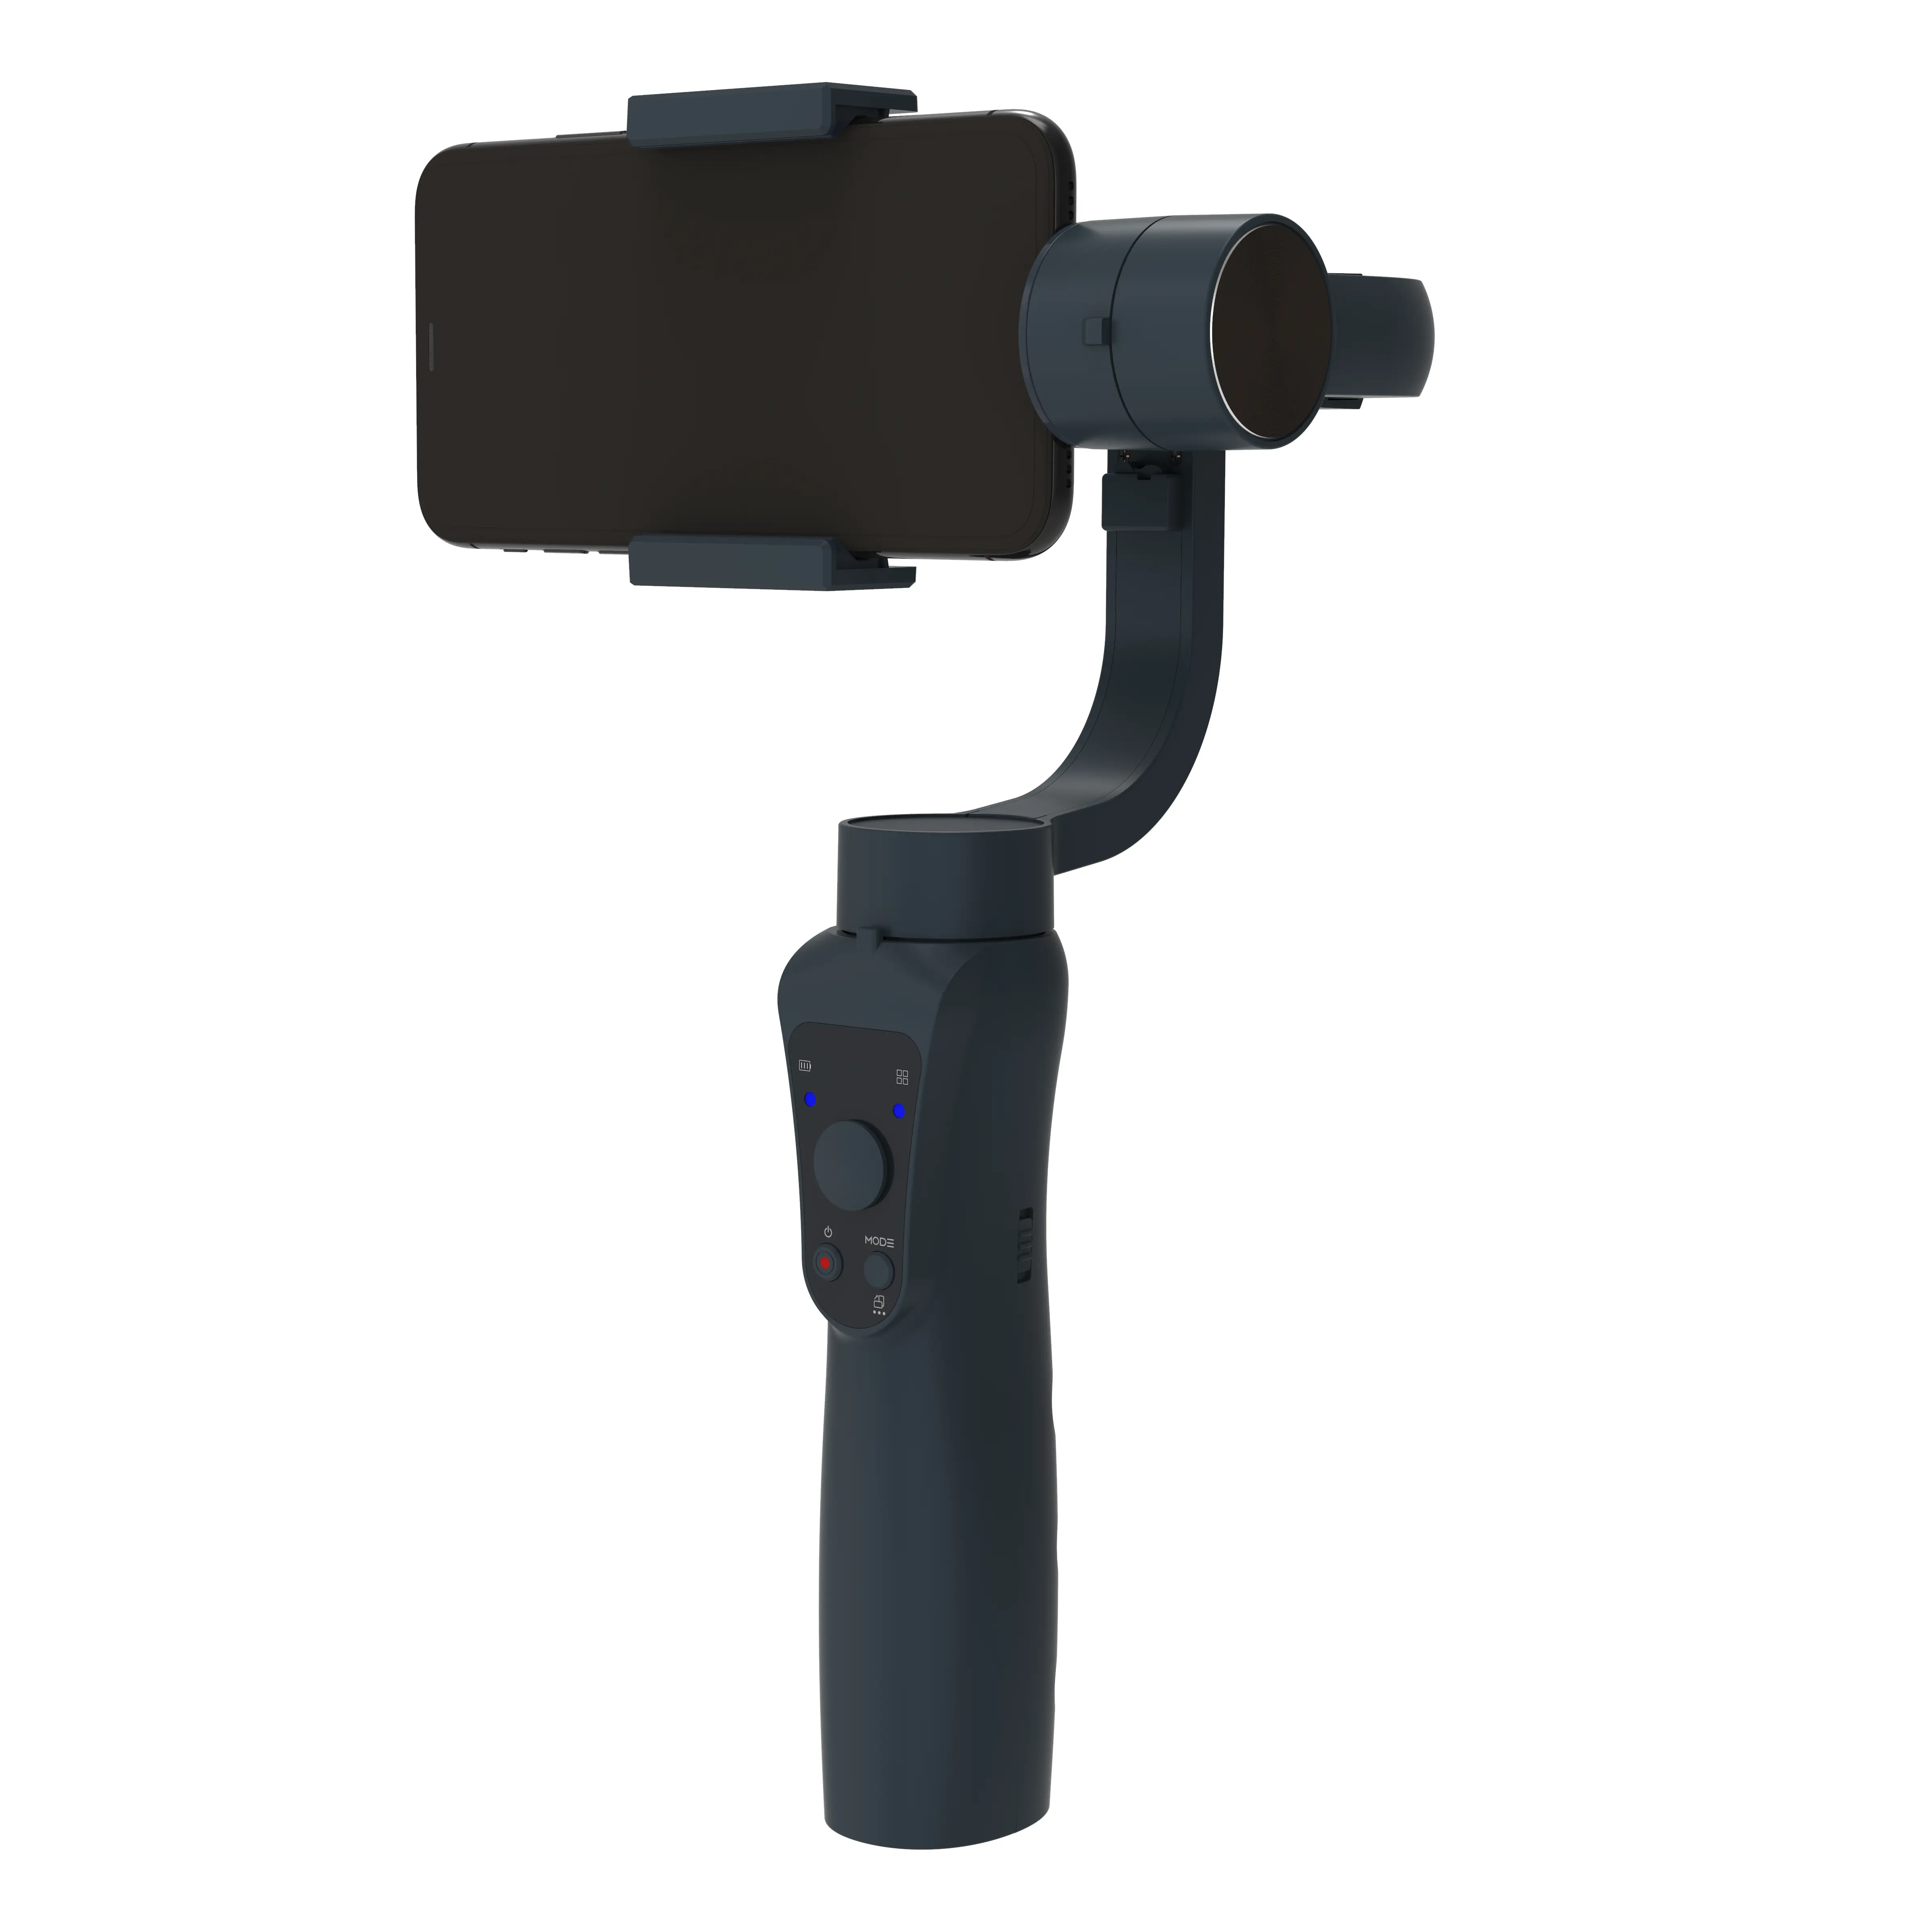 2018 best popular 3-Axis handheld gimbal stabilizer support various smartphone and camera with 4000mAh Power Bank